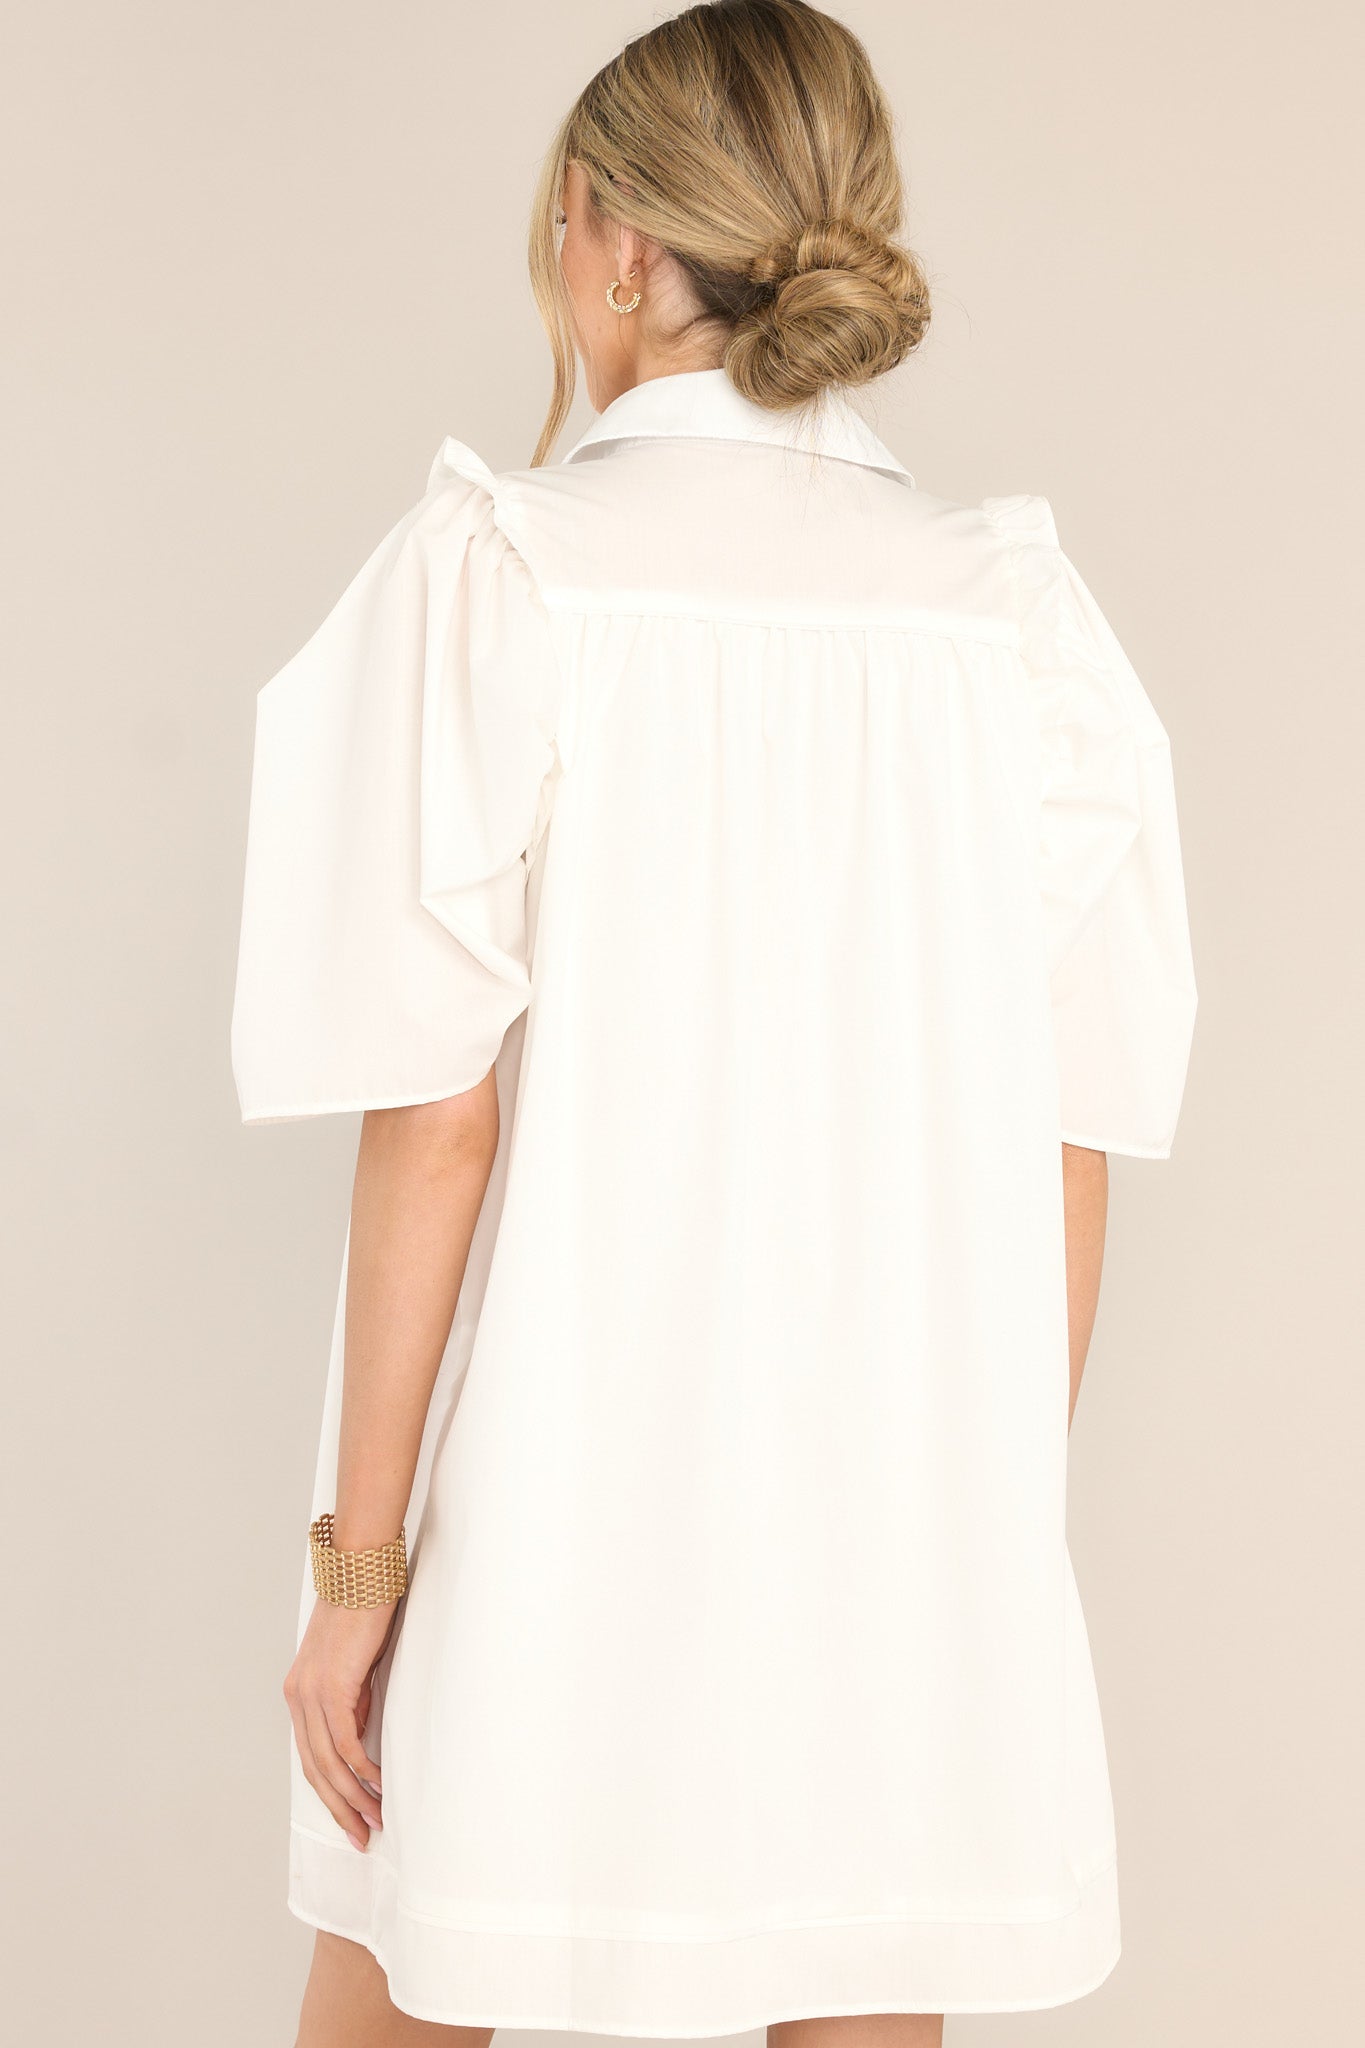 Back view of this dress that features a collared neckline, functional buttons down the front, butterfly short sleeves, and ruffle detailing.